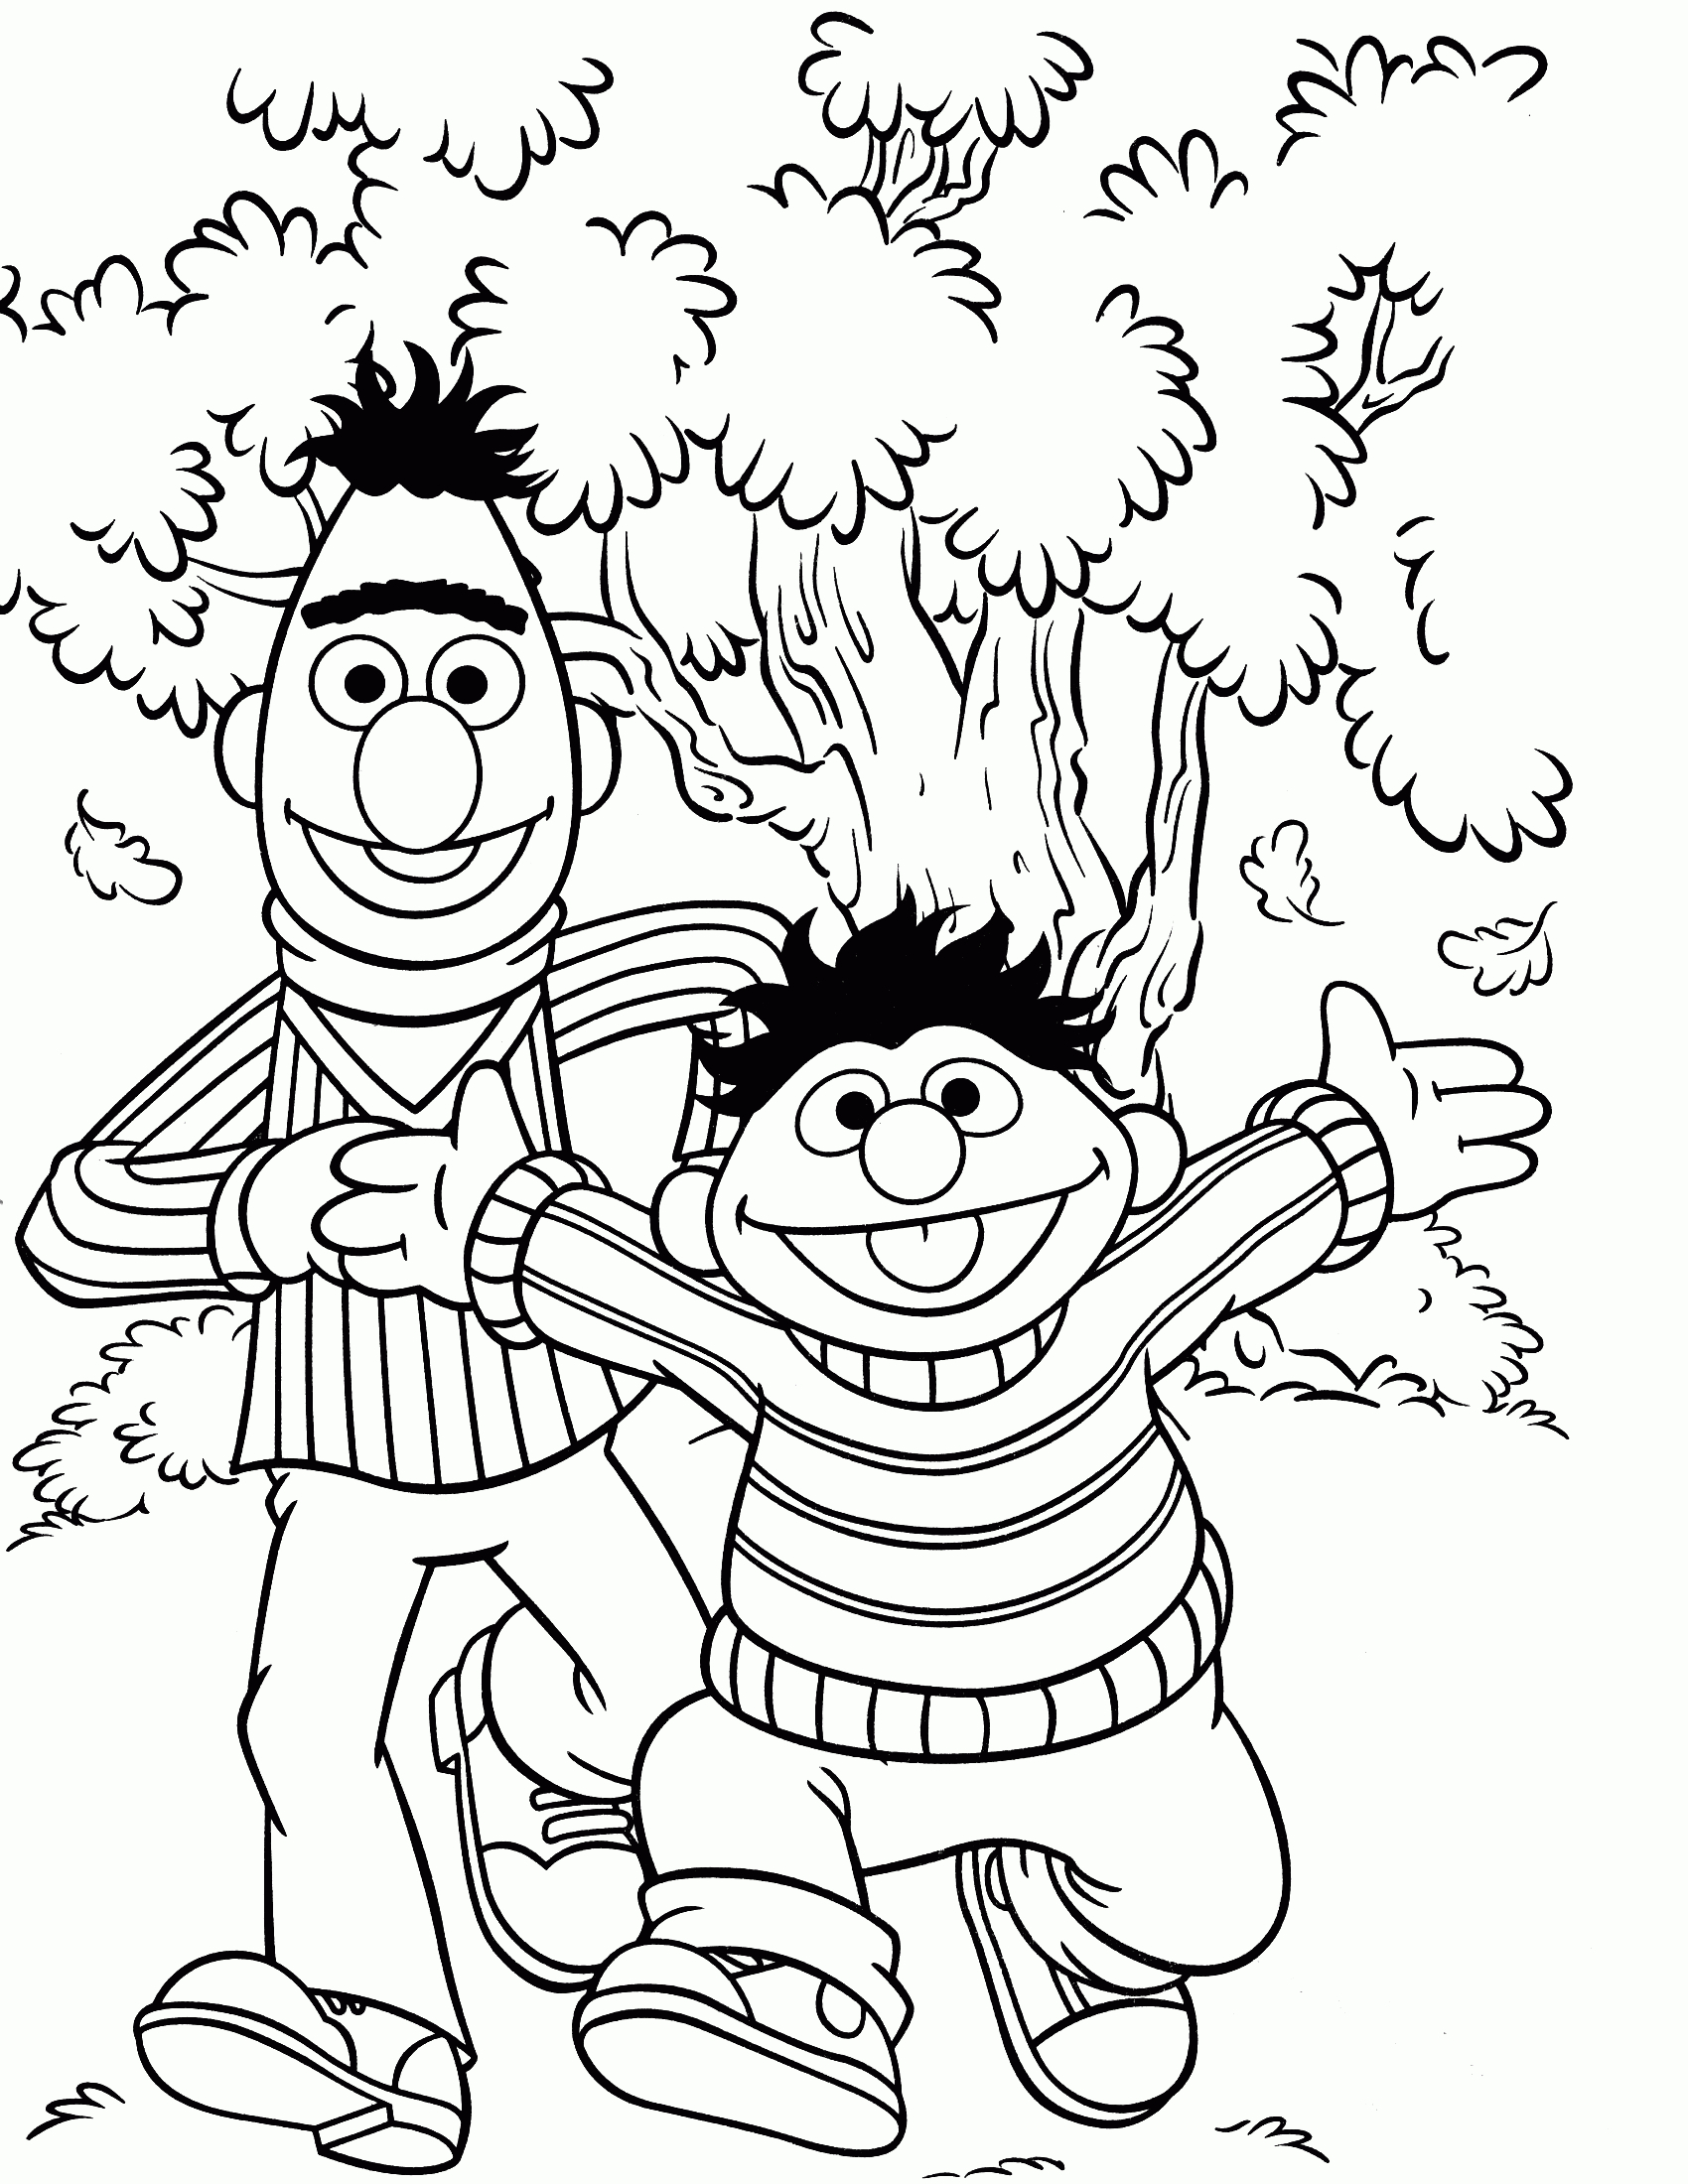 √ Sesame Street Count Coloring Pages - Free Printable Coloring Pages Sesame Street Characters